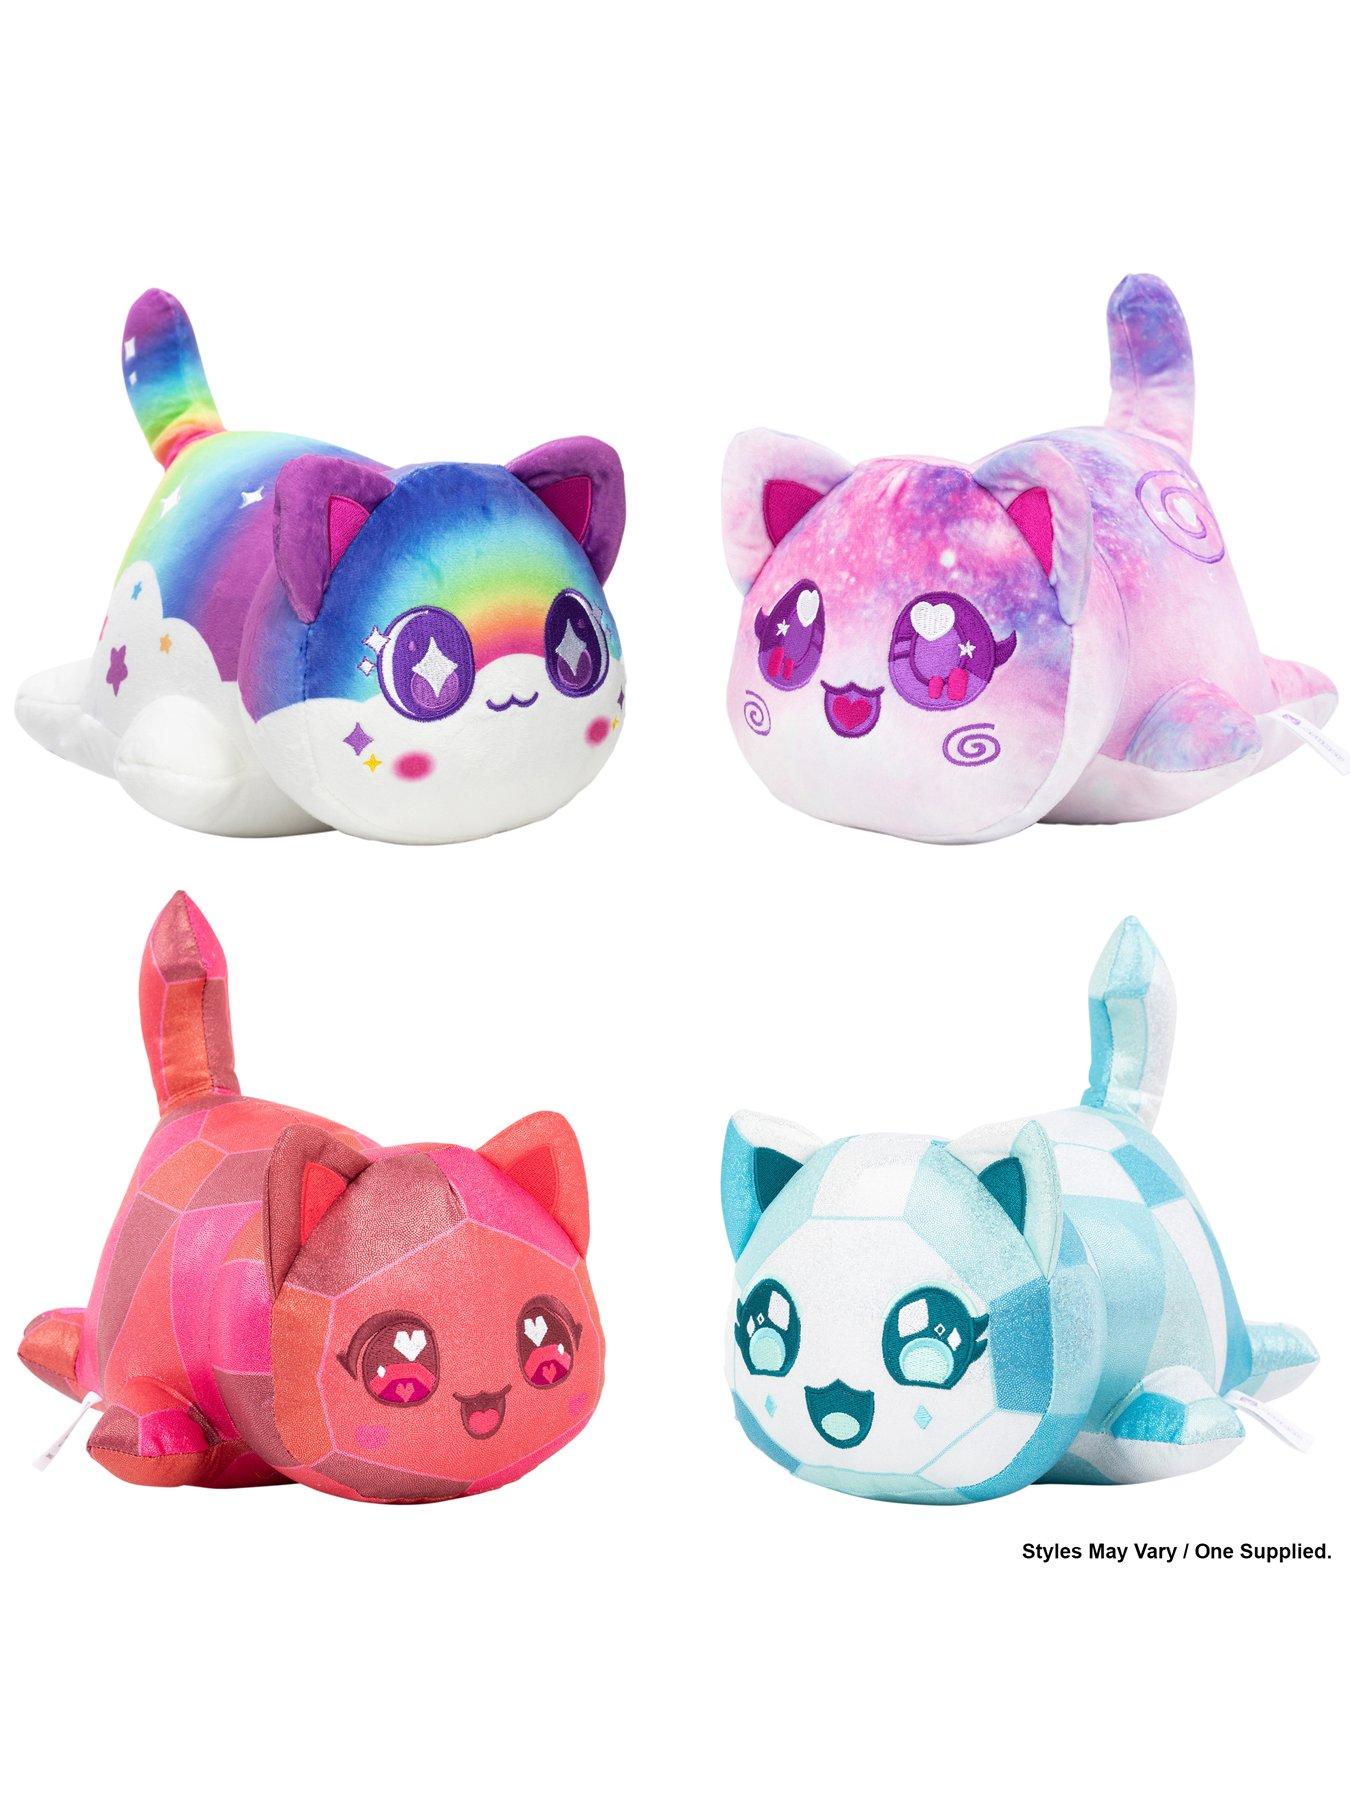 Aphmau Mystery MeeMeow 6-in Plush Series 4 (Styles May Vary